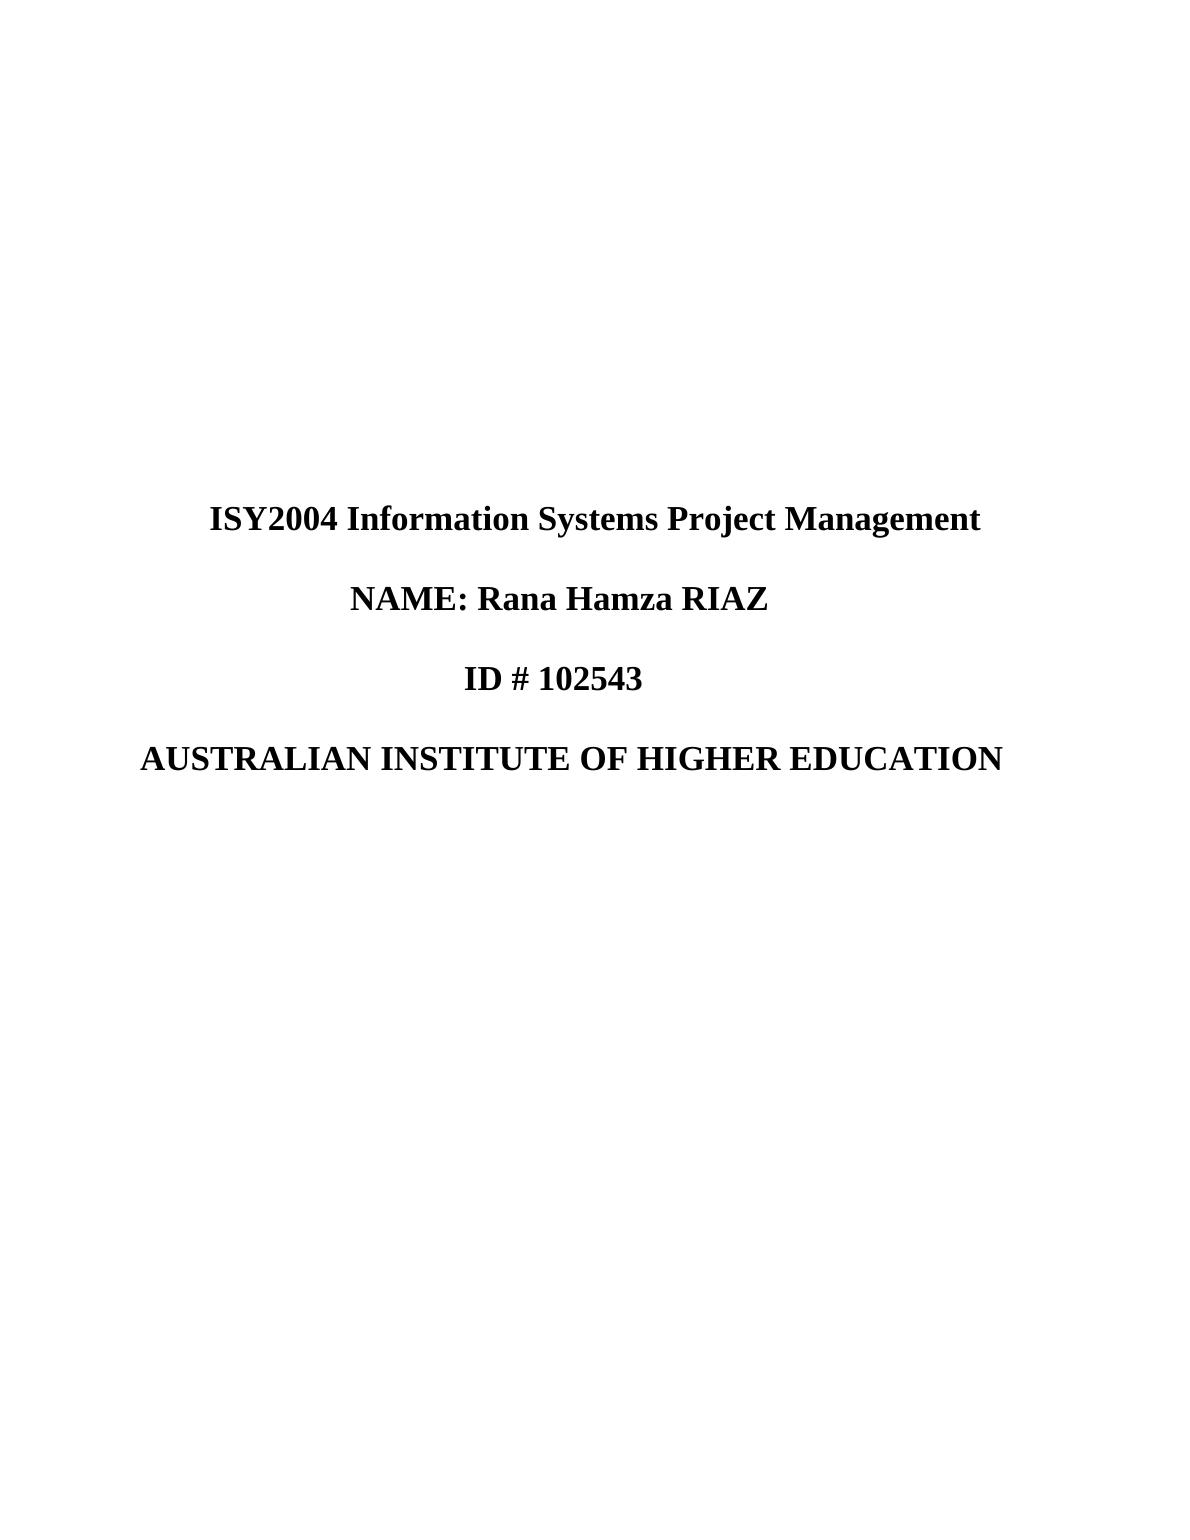 ISY2004 Information Systems Project Management Assignment_1